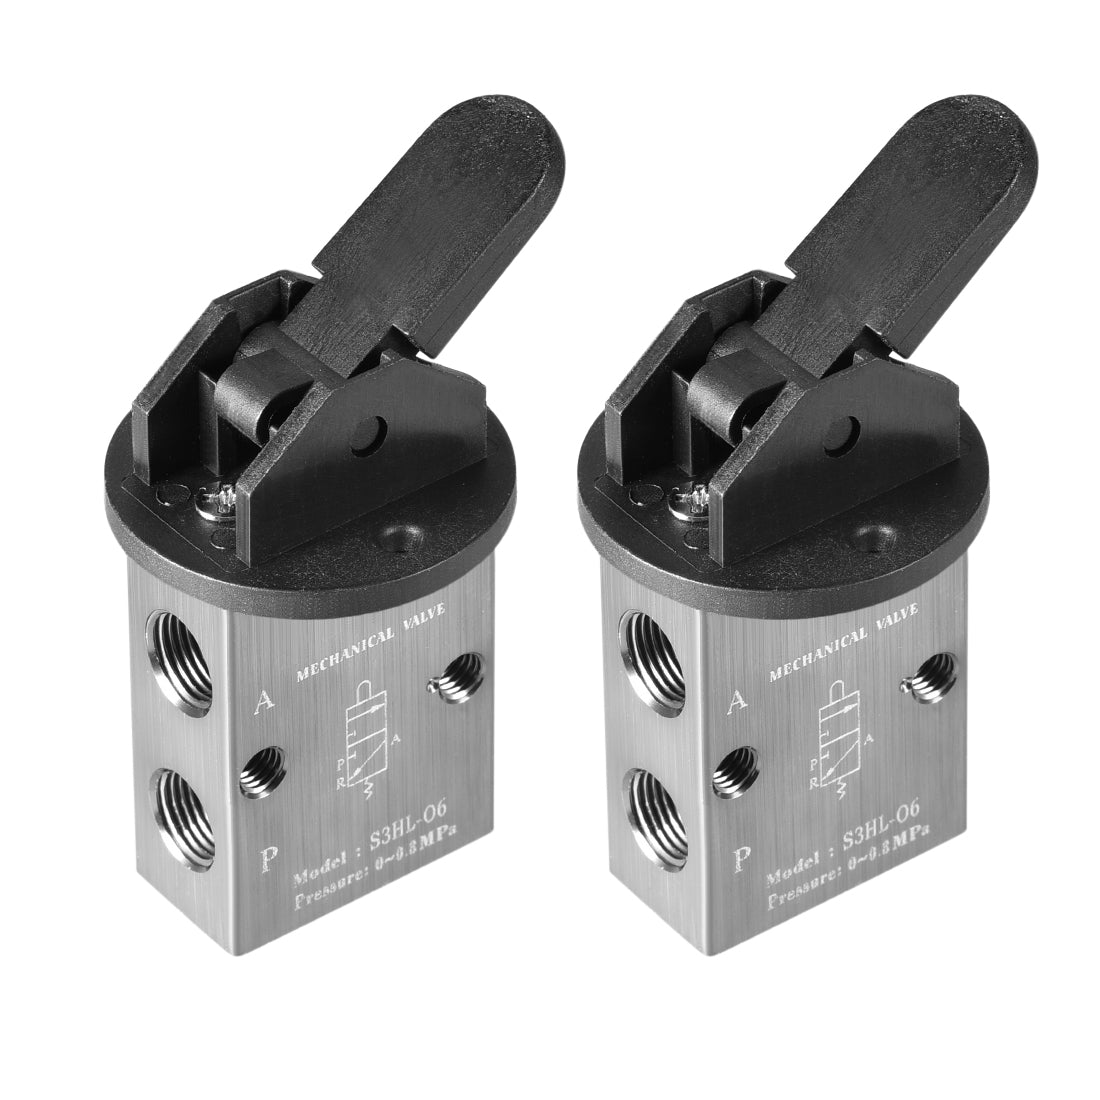 uxcell Uxcell S3HL-06 2 Position 3 Way 1/8" PT Manual Hand Pull Pneumatic Solenoid Mechanical Valve 2pcs